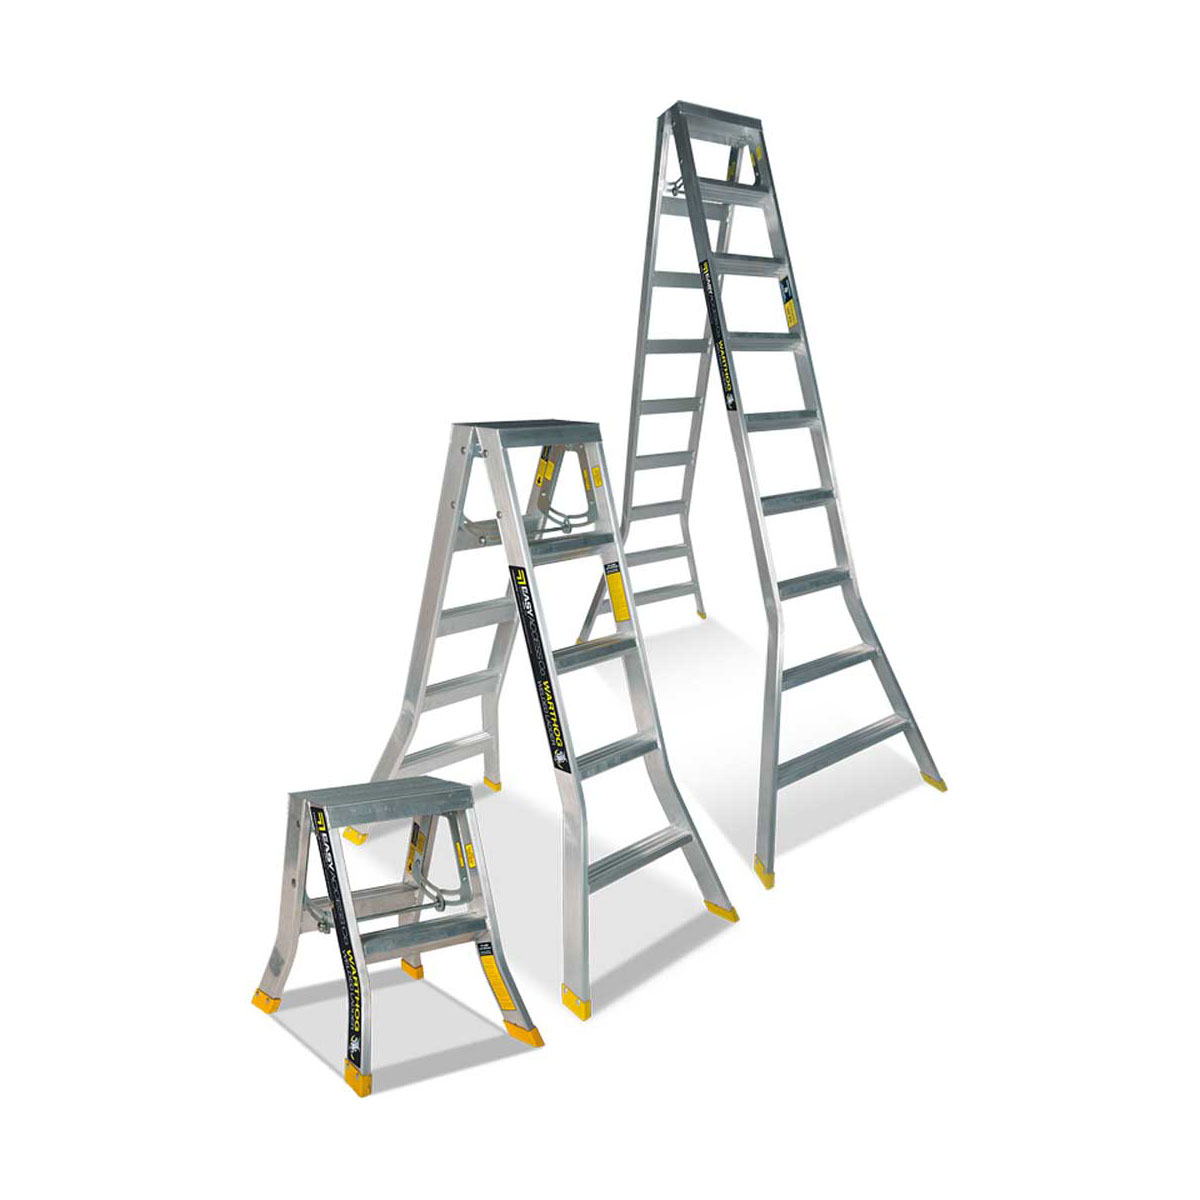 Buy Step Ladders - Heavy-Duty  in Step Ladders from Warthog available at Astrolift NZ